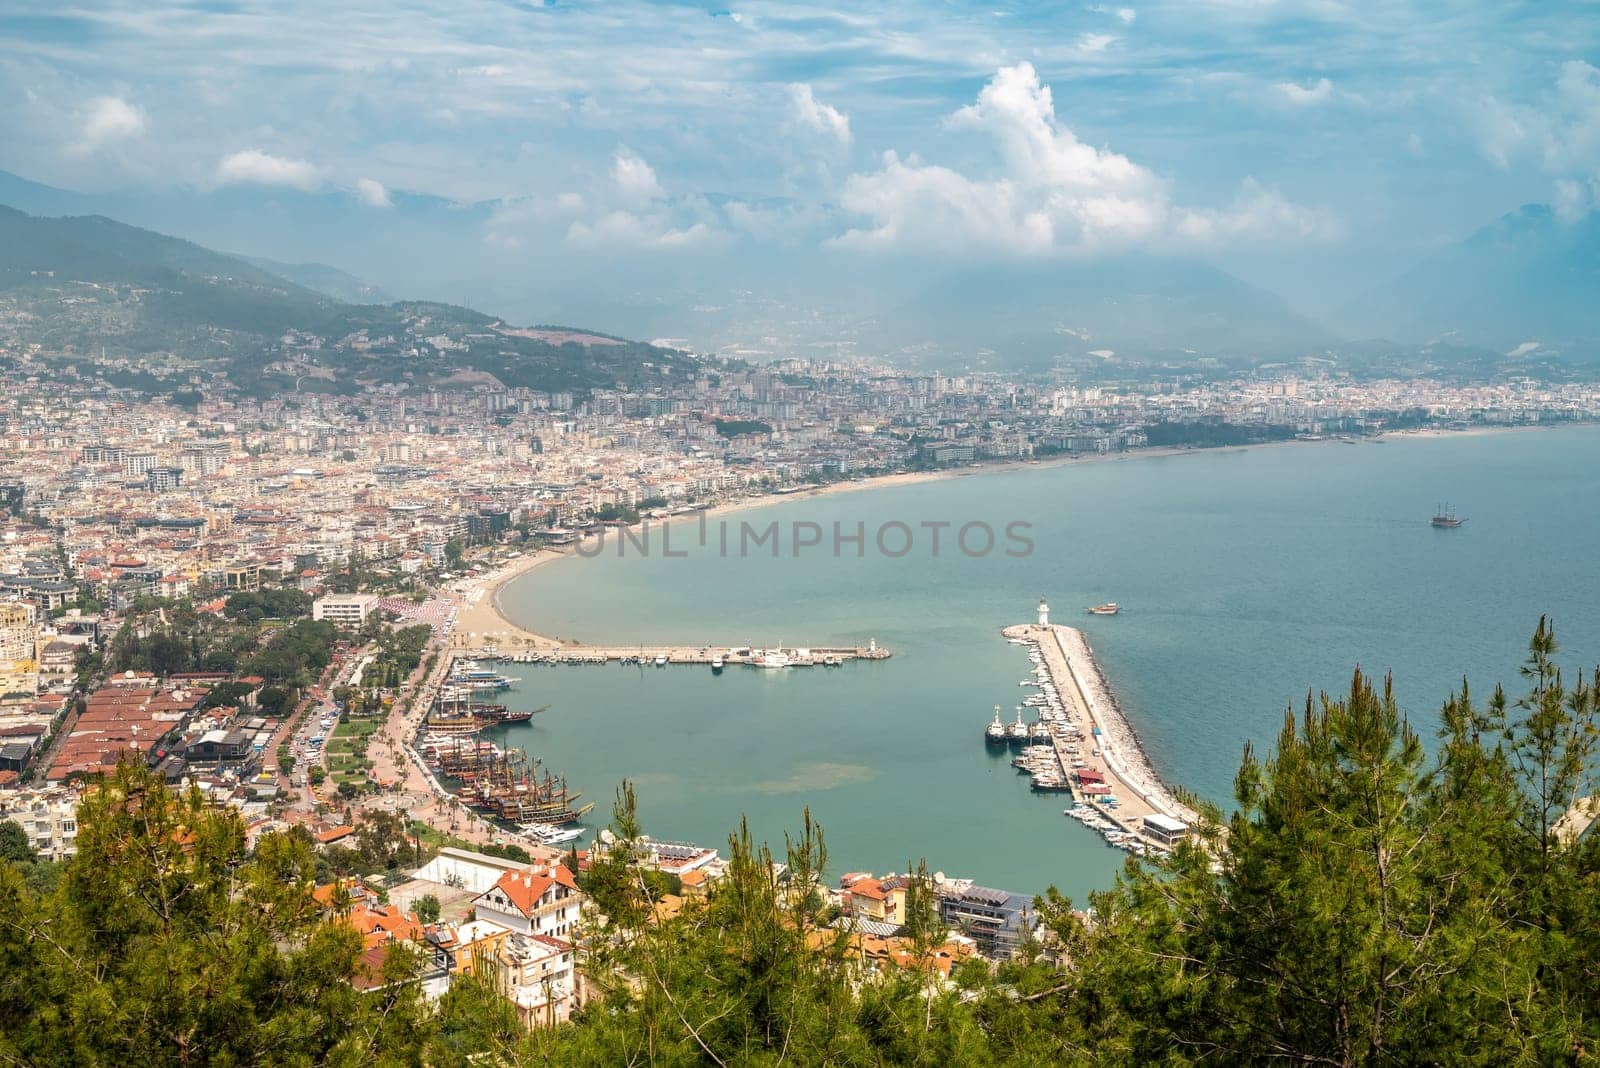 Aerial view of Alanya marina and city on a cloudy day by Sonat